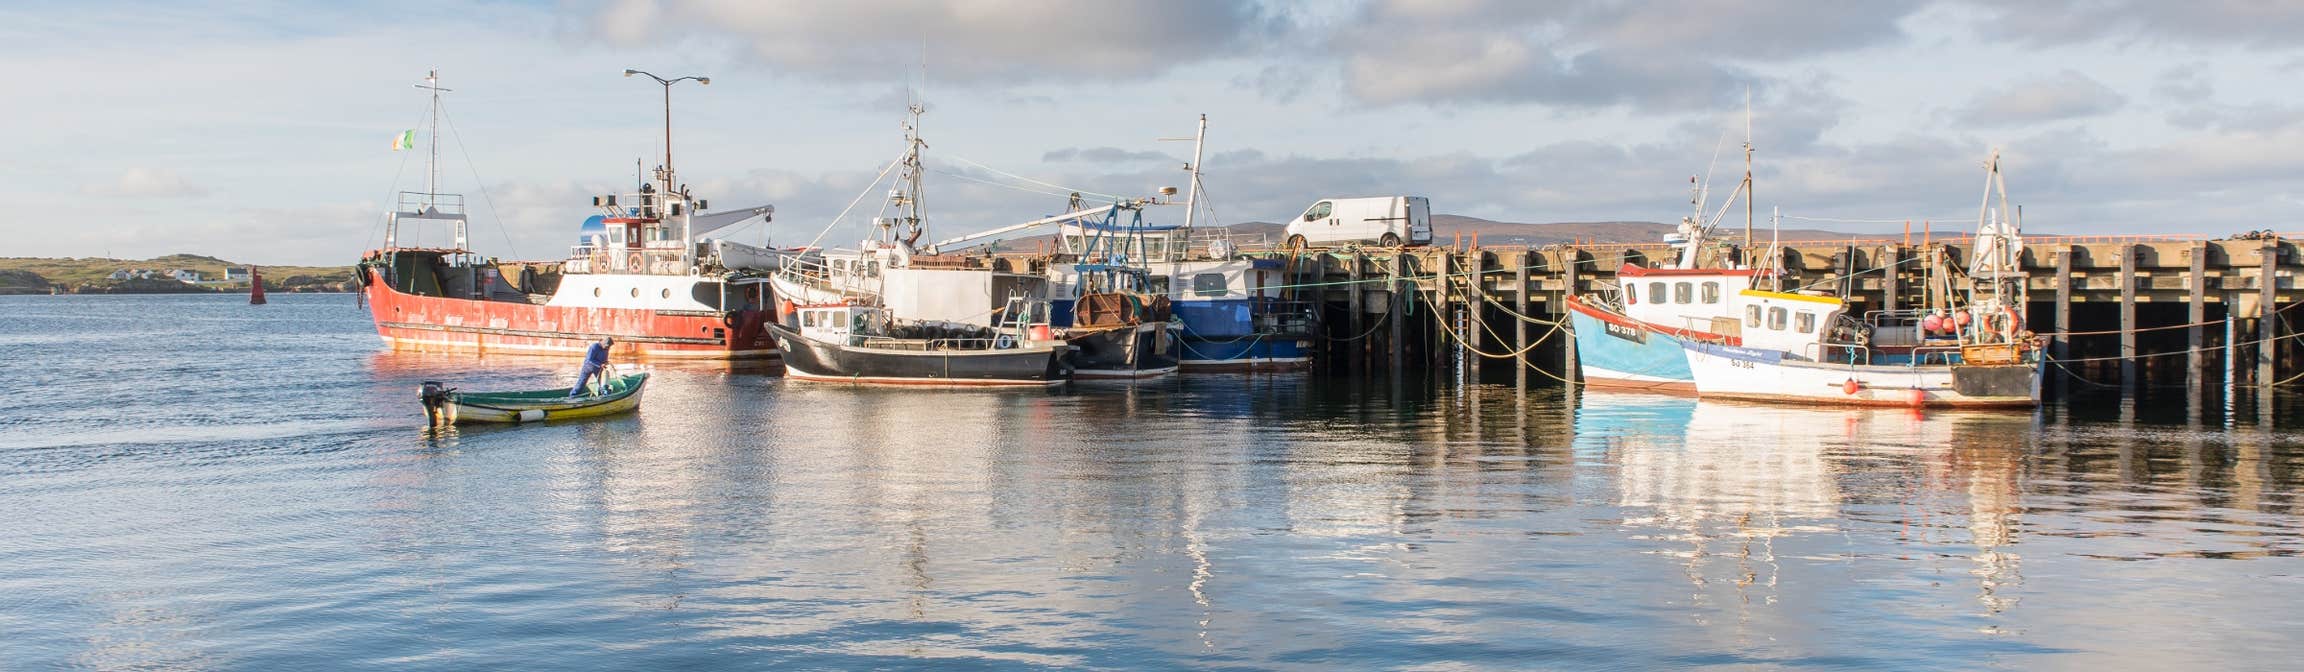 Image of the harbour in Burtonport in County Donegal